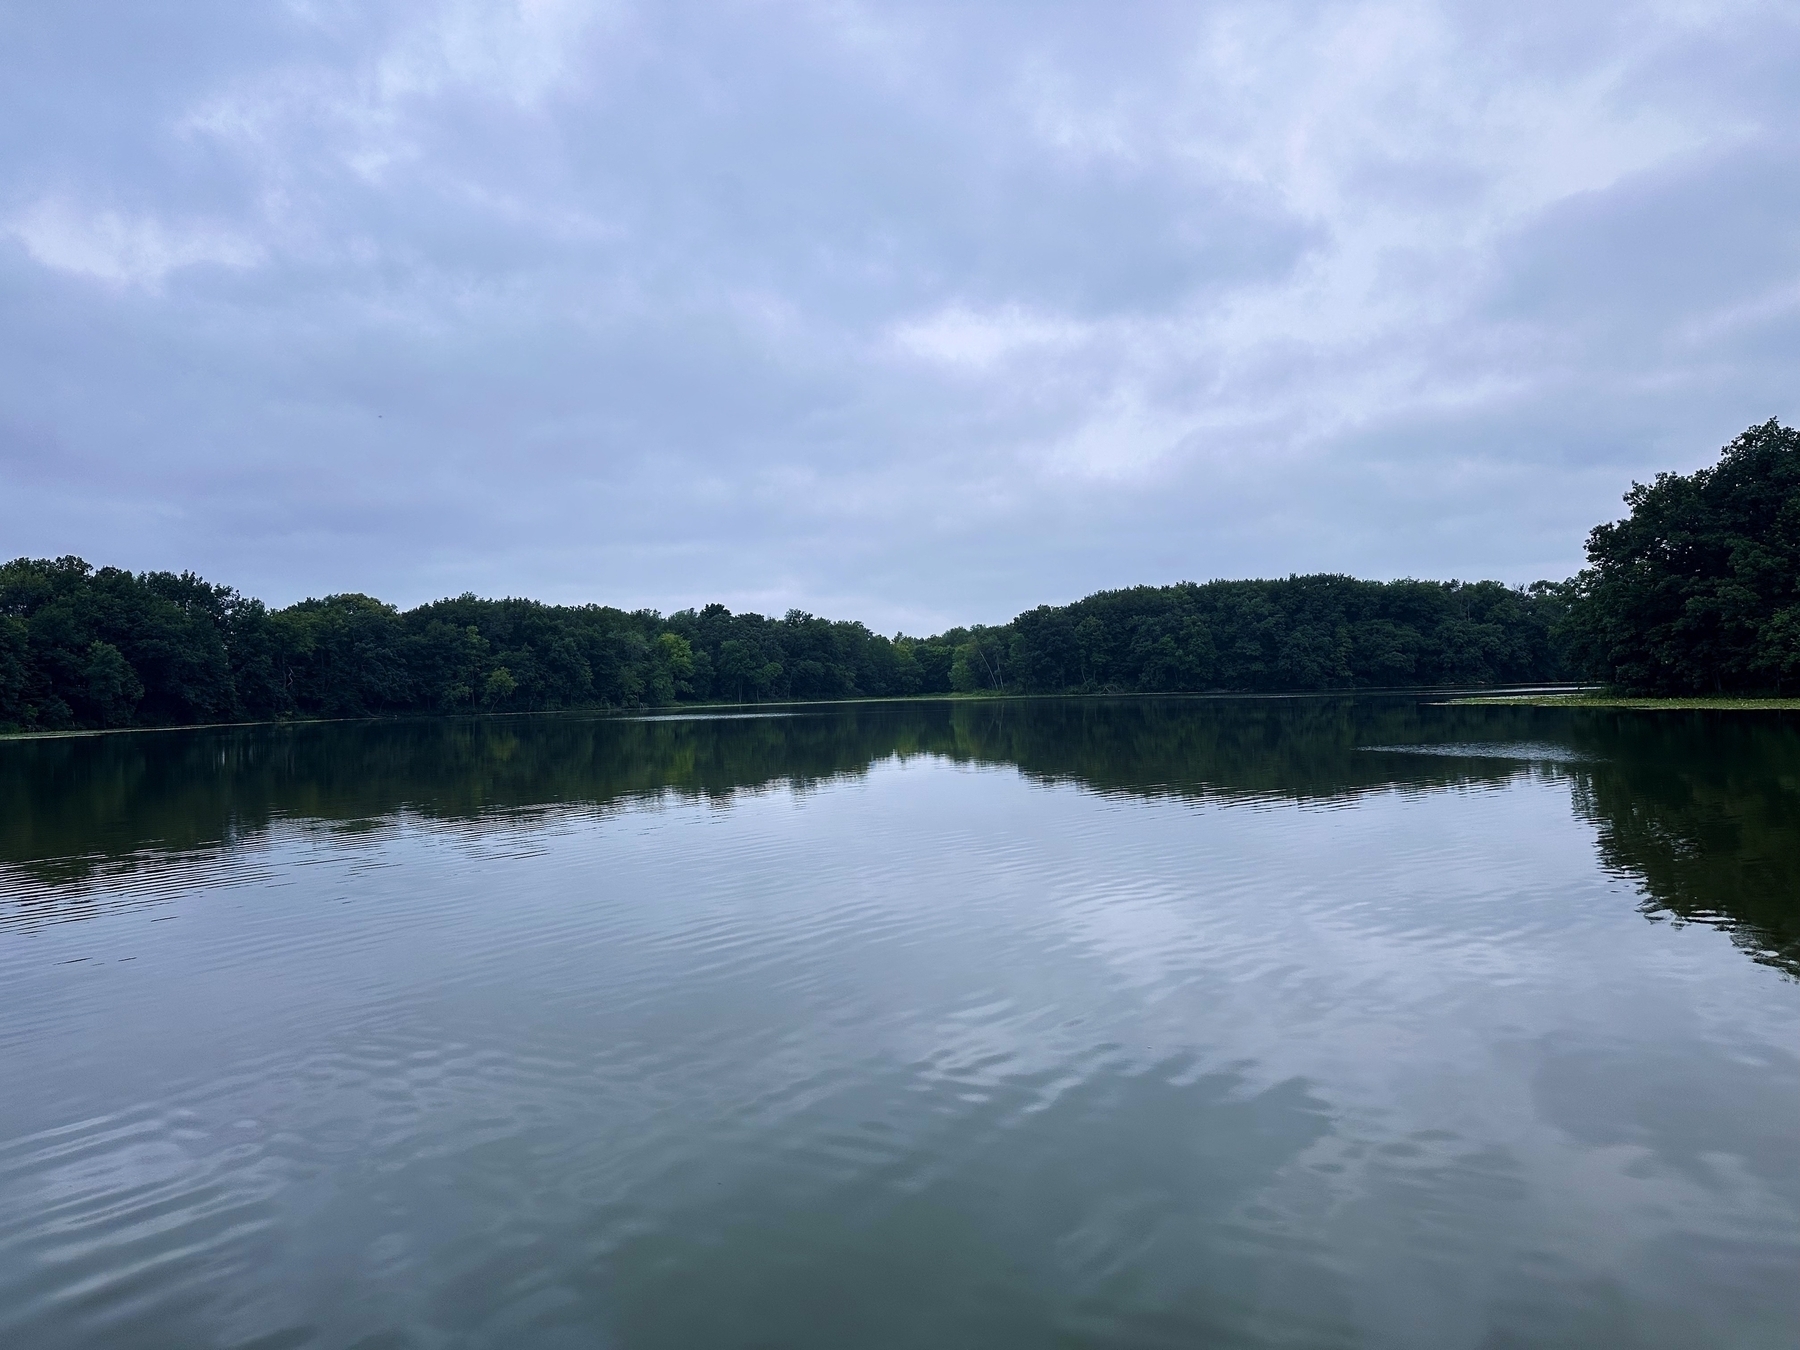 Calm lake reflecting the cloudy sky bordered by dense green forest creating a serene and peaceful atmosphere.